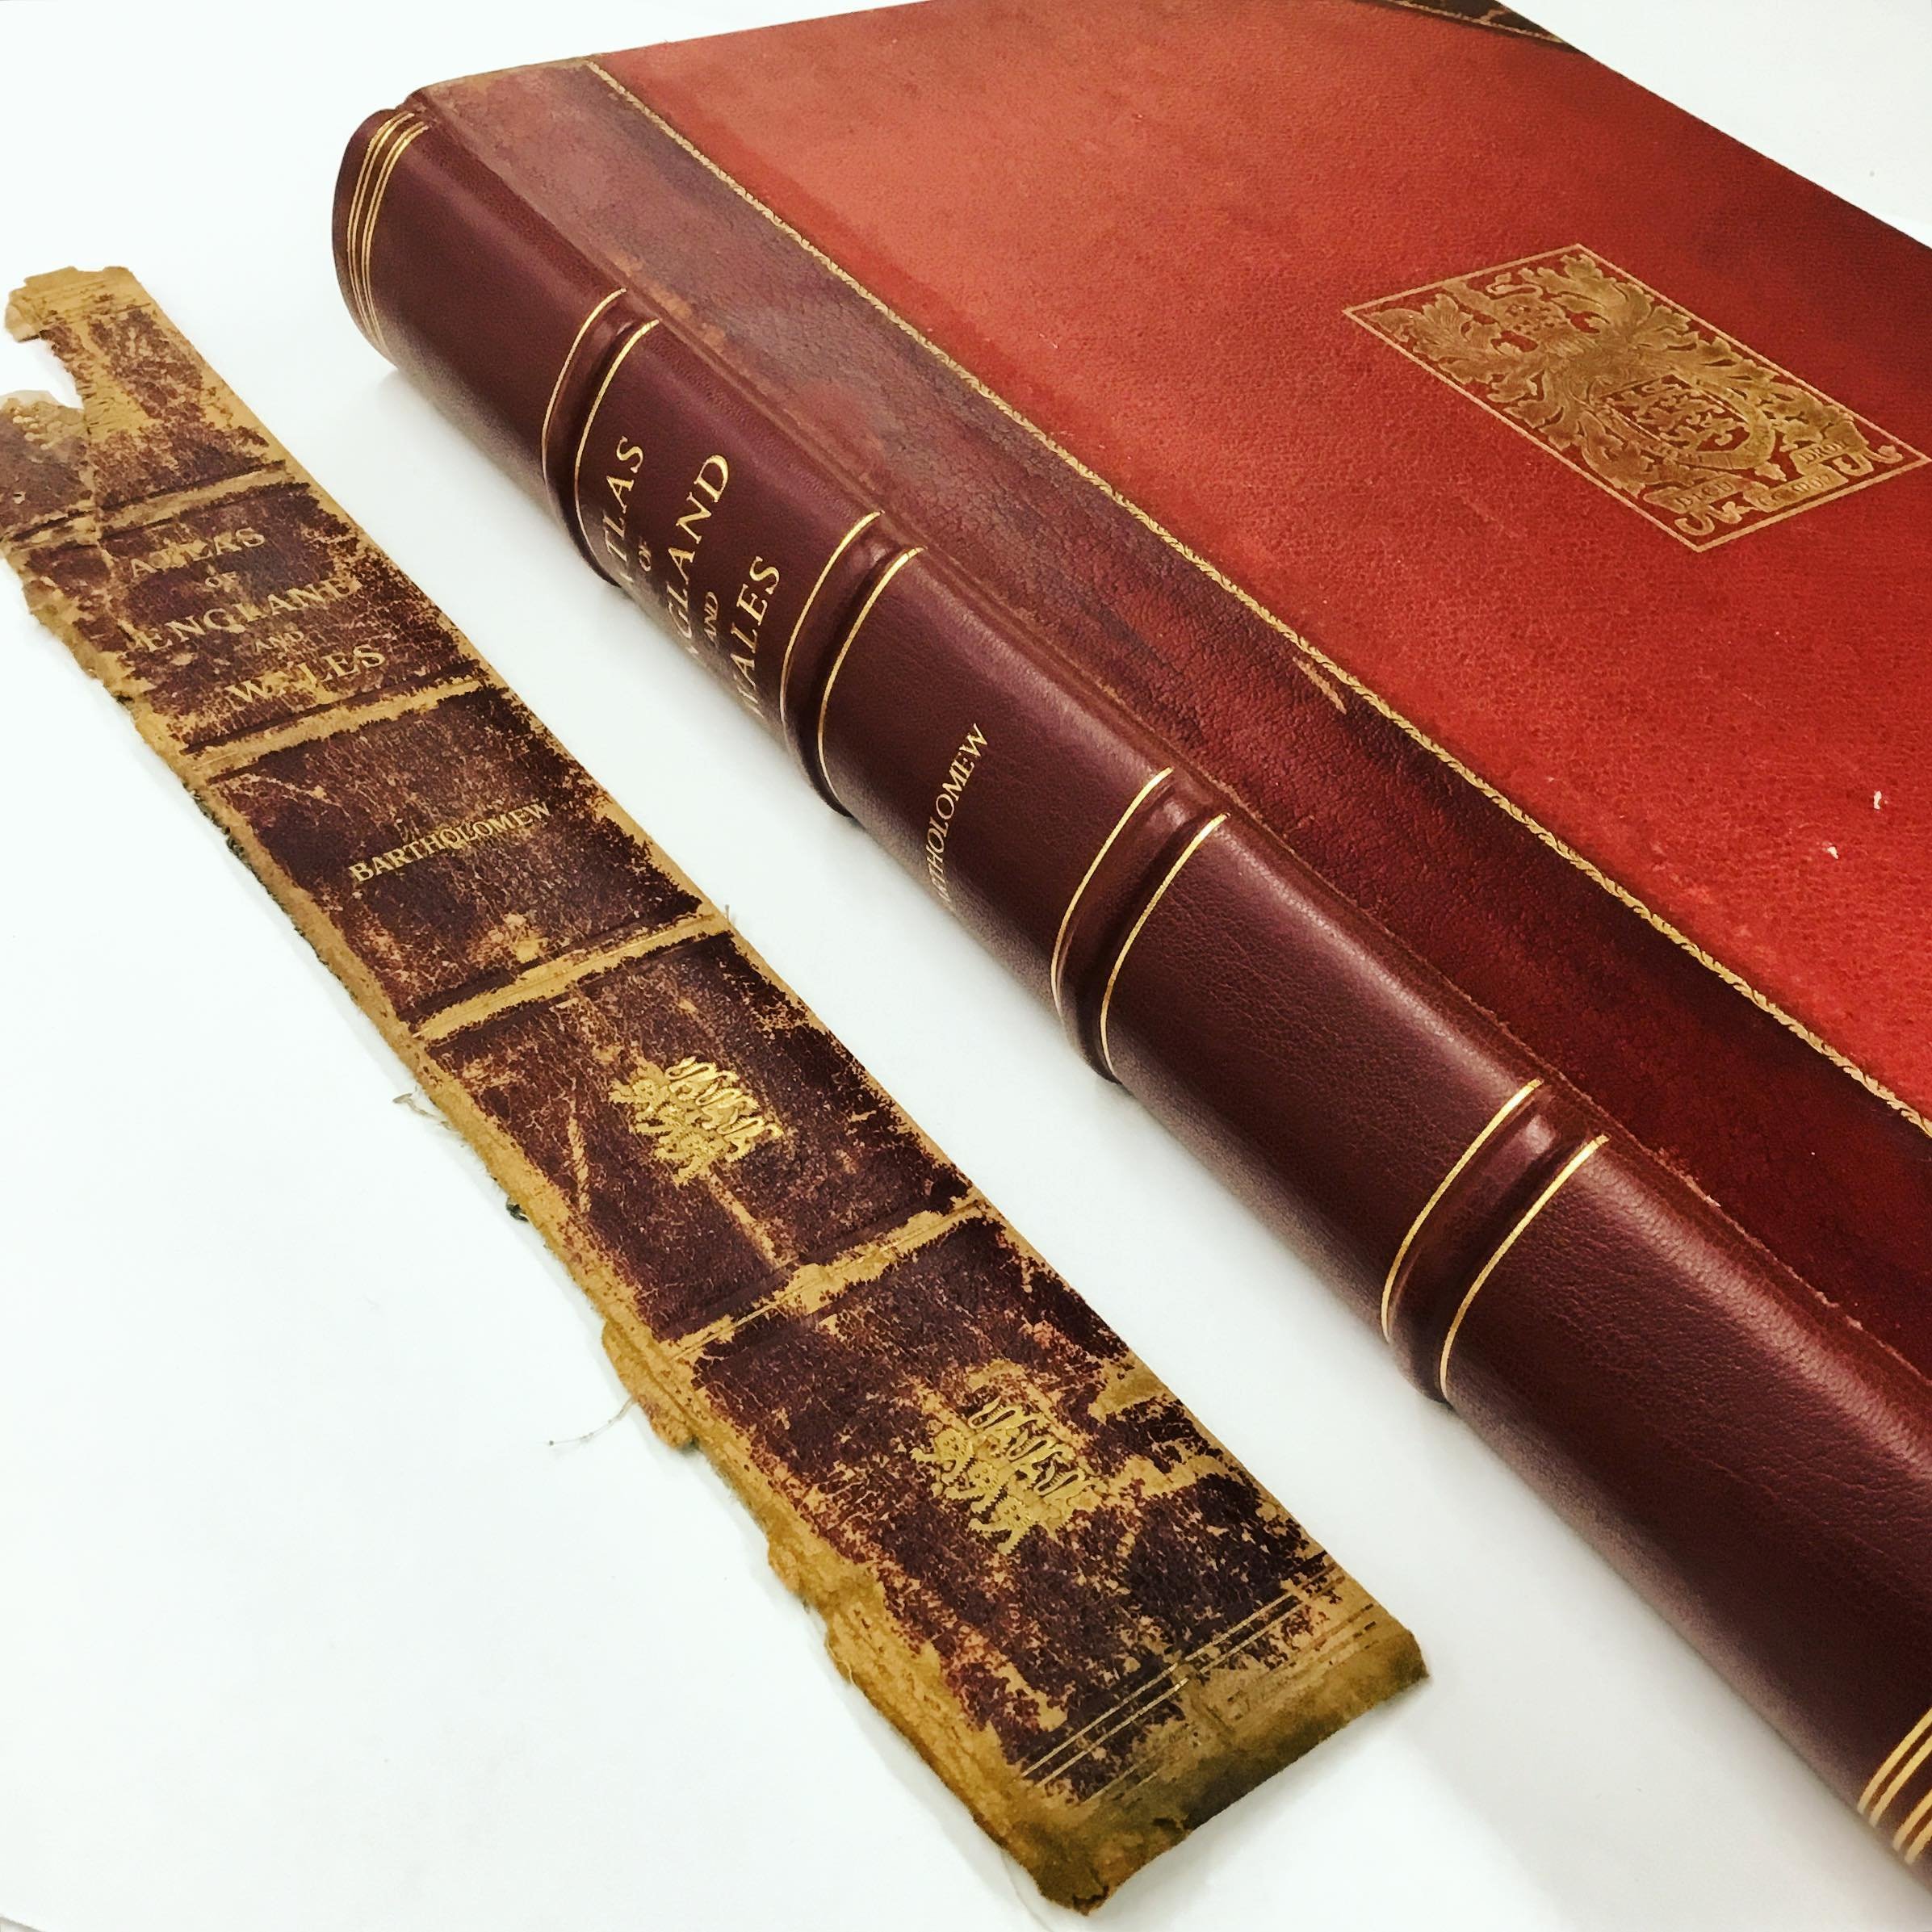 Many a book comes into the shop for repair and a refresh and here is a perfect example! 

This giant atlas of England and Wales was brought in with a crumbling spine, and soon it will be returning home with a new lease on life!

#bookrepair #bookrest